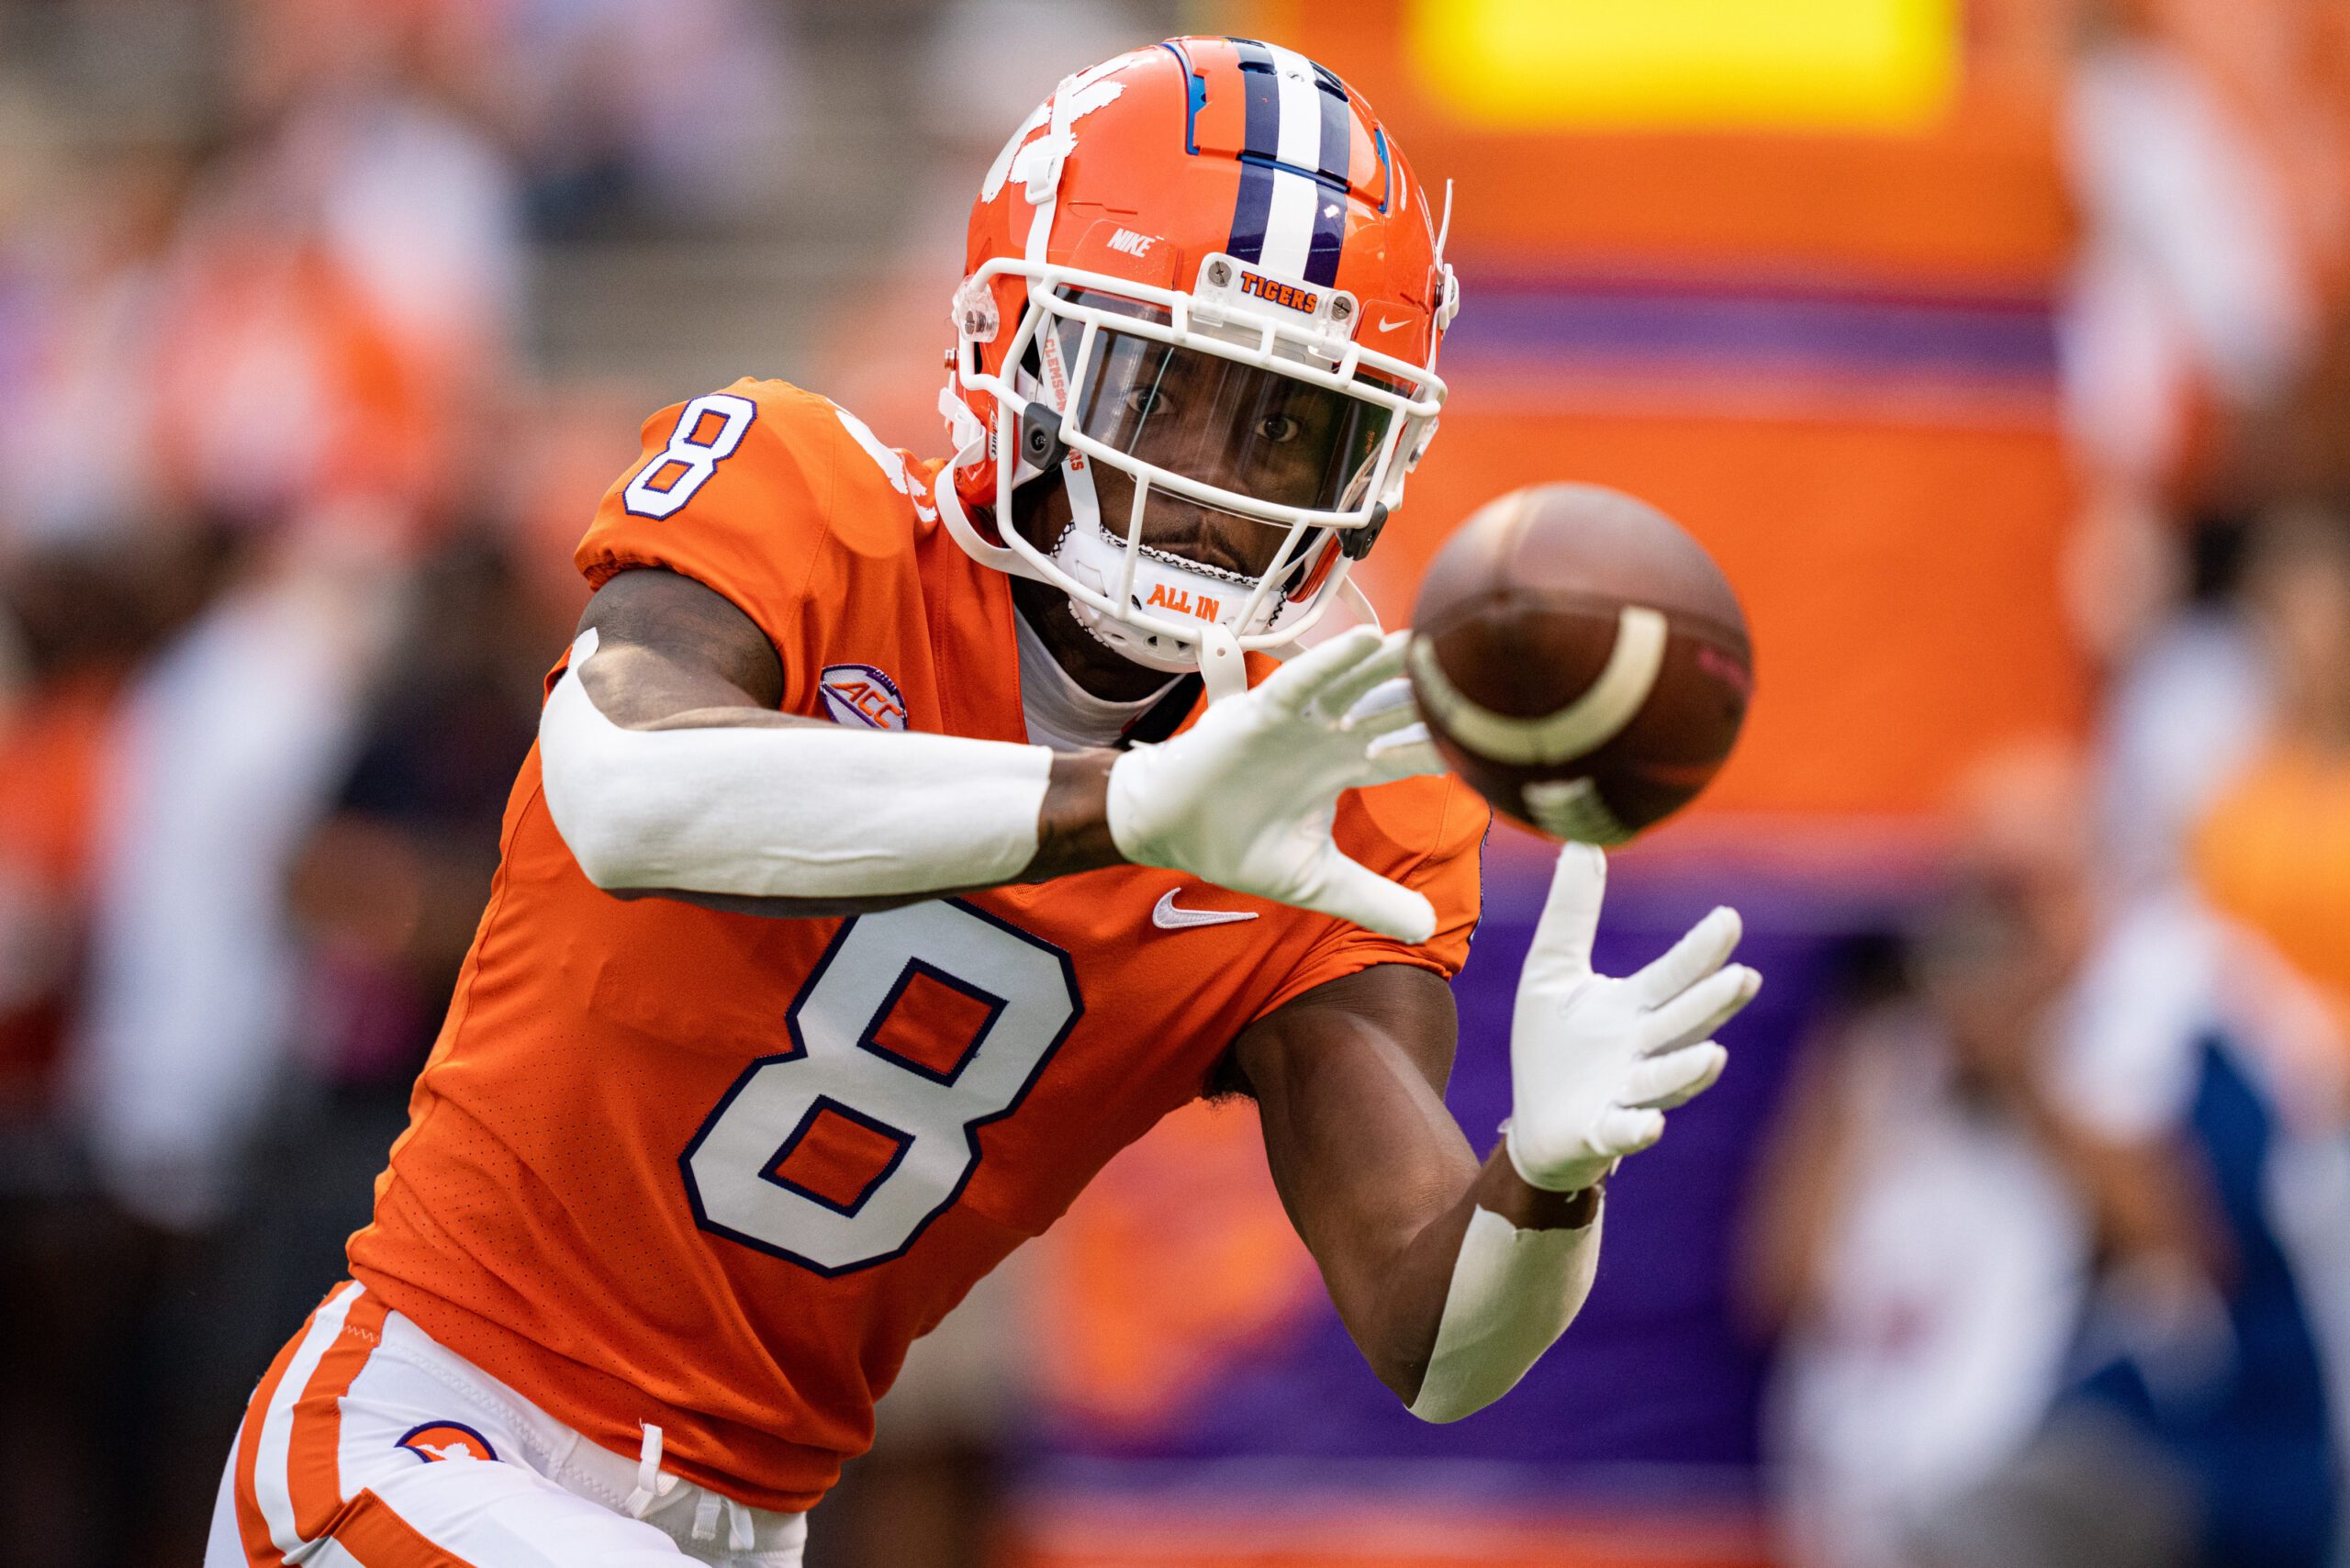 Marco of 14 personnel breaks down another of the 2022 rookies from this draft class, Justyn Ross. Talking his expected dynasty fantasy football value, where Ross lands among 2022 rookie rankings, and his NFL player comp for dynasty.